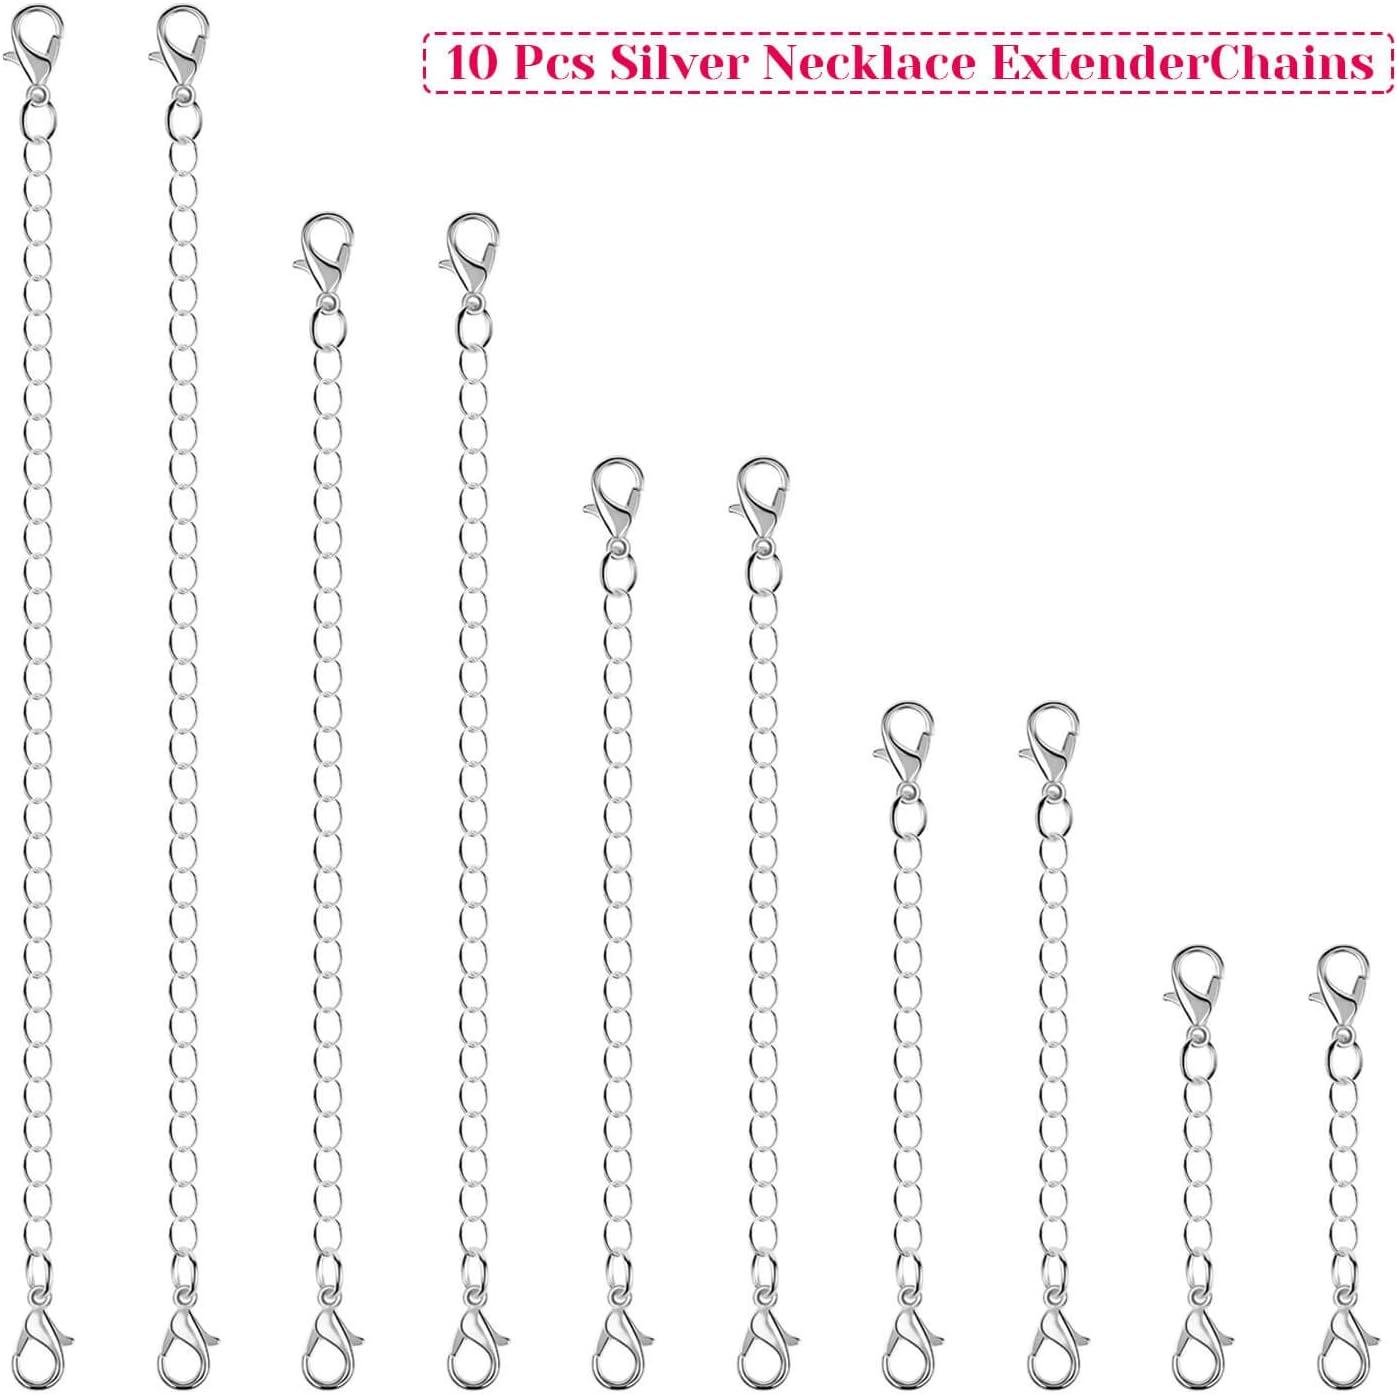 Anezus anezus Chain Extenders for Necklaces, 10pcs Gold Jewelry Extenders  for Necklaces, Stainless Steel Chain Extenders for Necklace